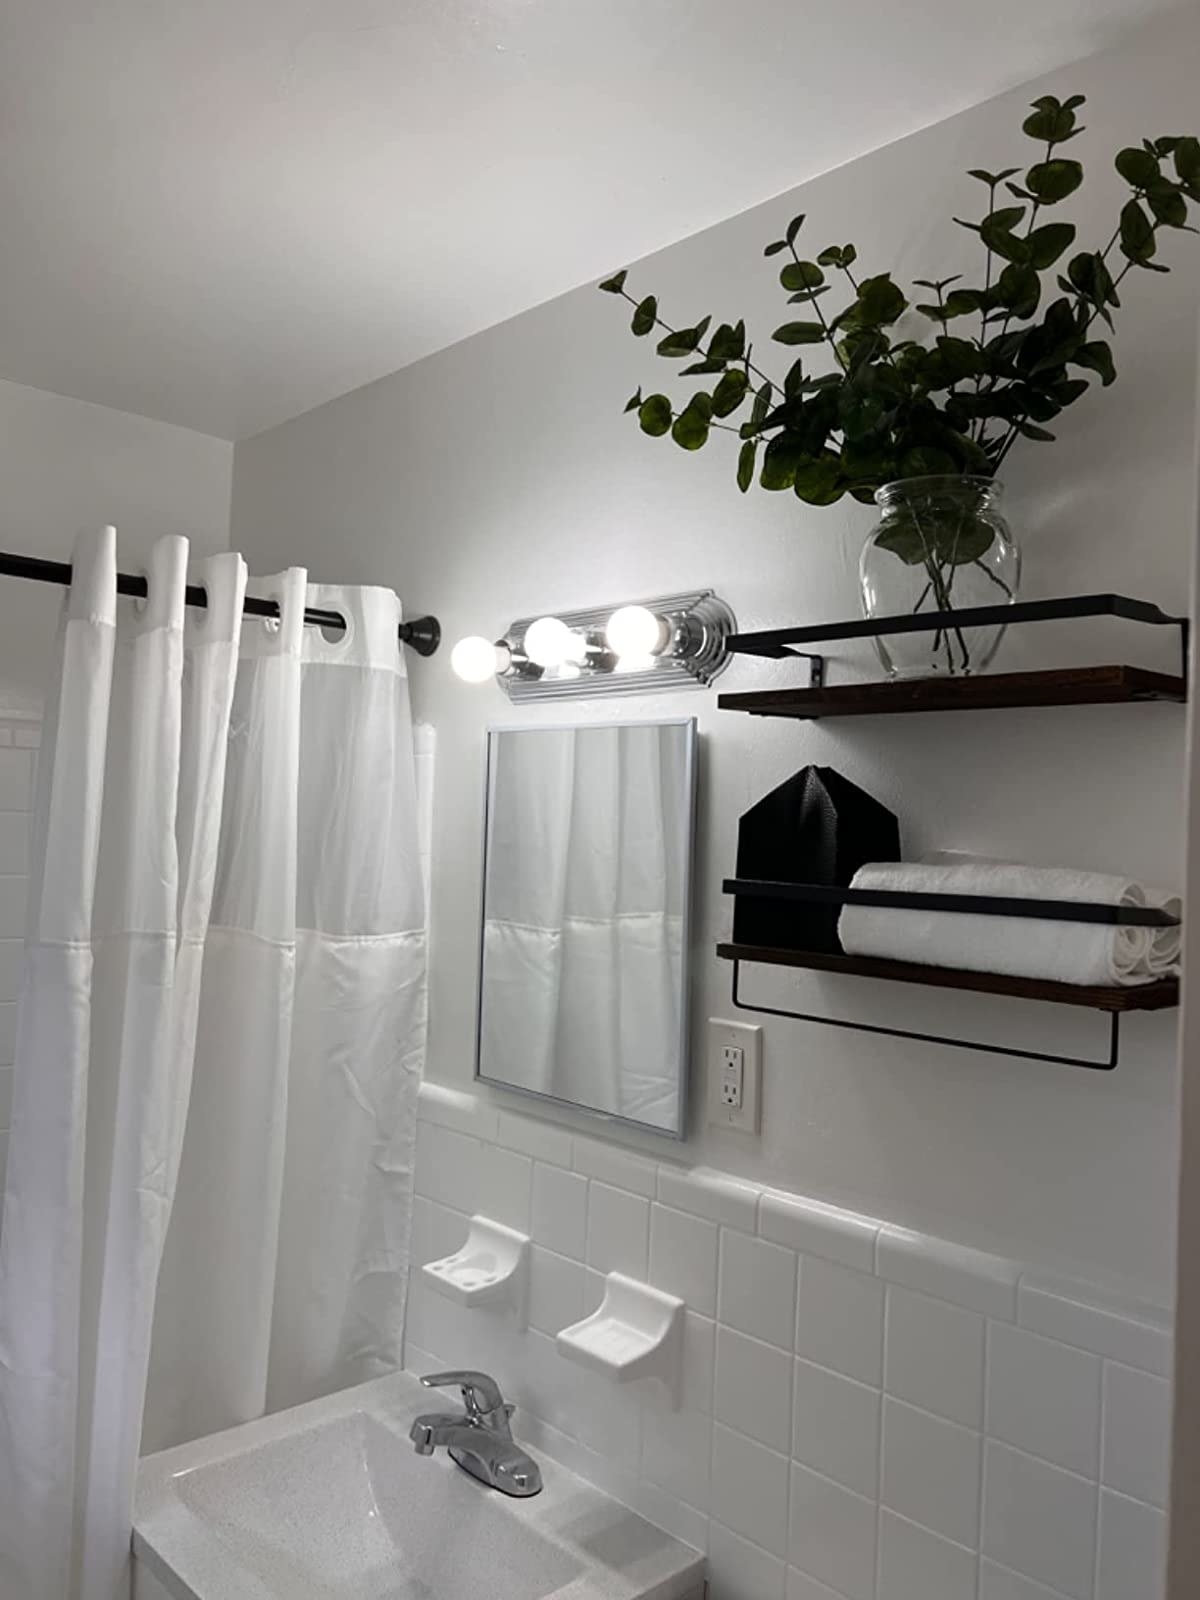 Reviewer photo of the shelves in a bathroom